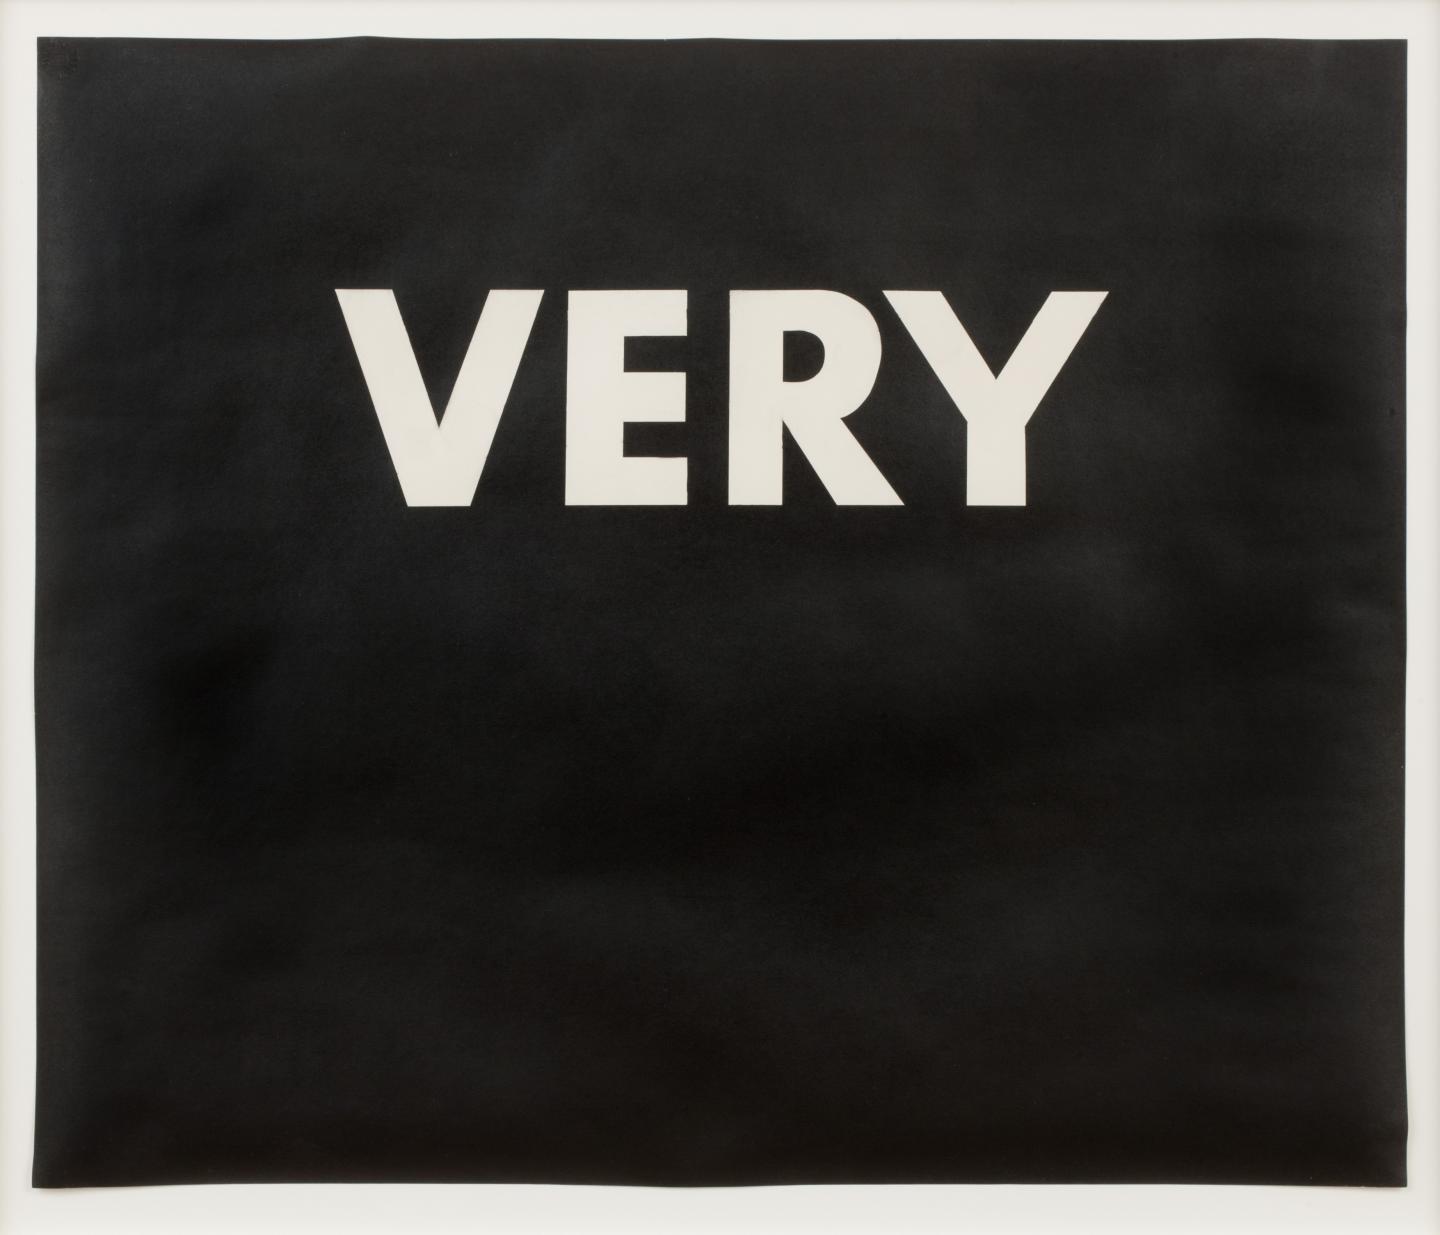 Ed Ruscha Very, 1973. Pastel on paper, 57.78 x 73.02 cm. UBS Art Collection © Ed Ruscha. Courtesy of the artist and Gagosian. Photo Emily Hodes 